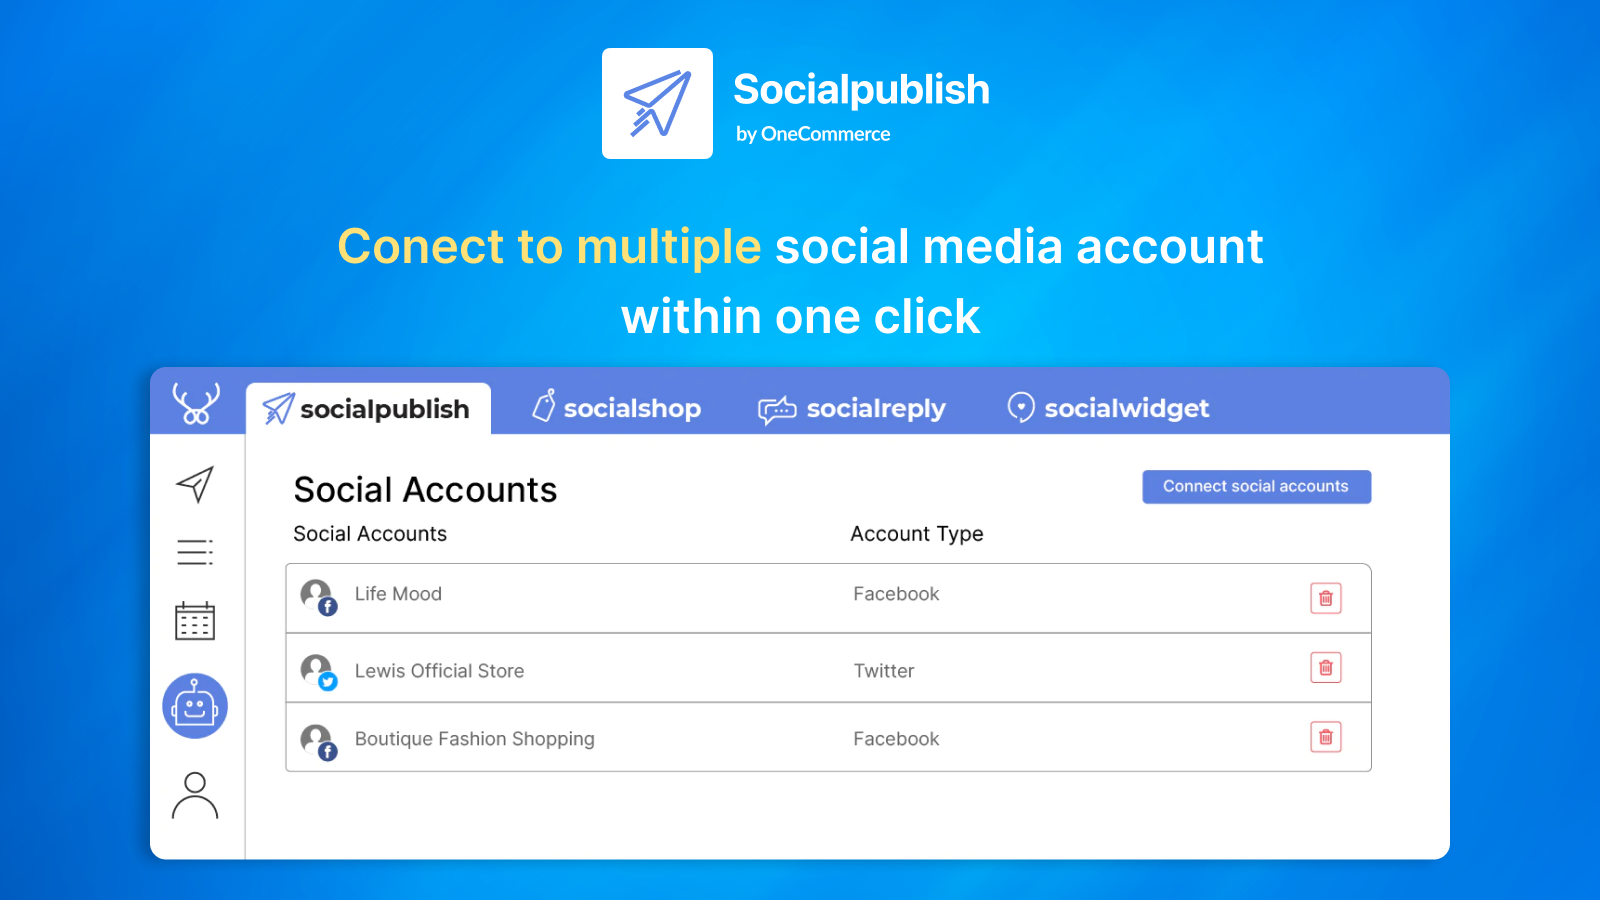 Connect to multiple social media accounts within 1 click